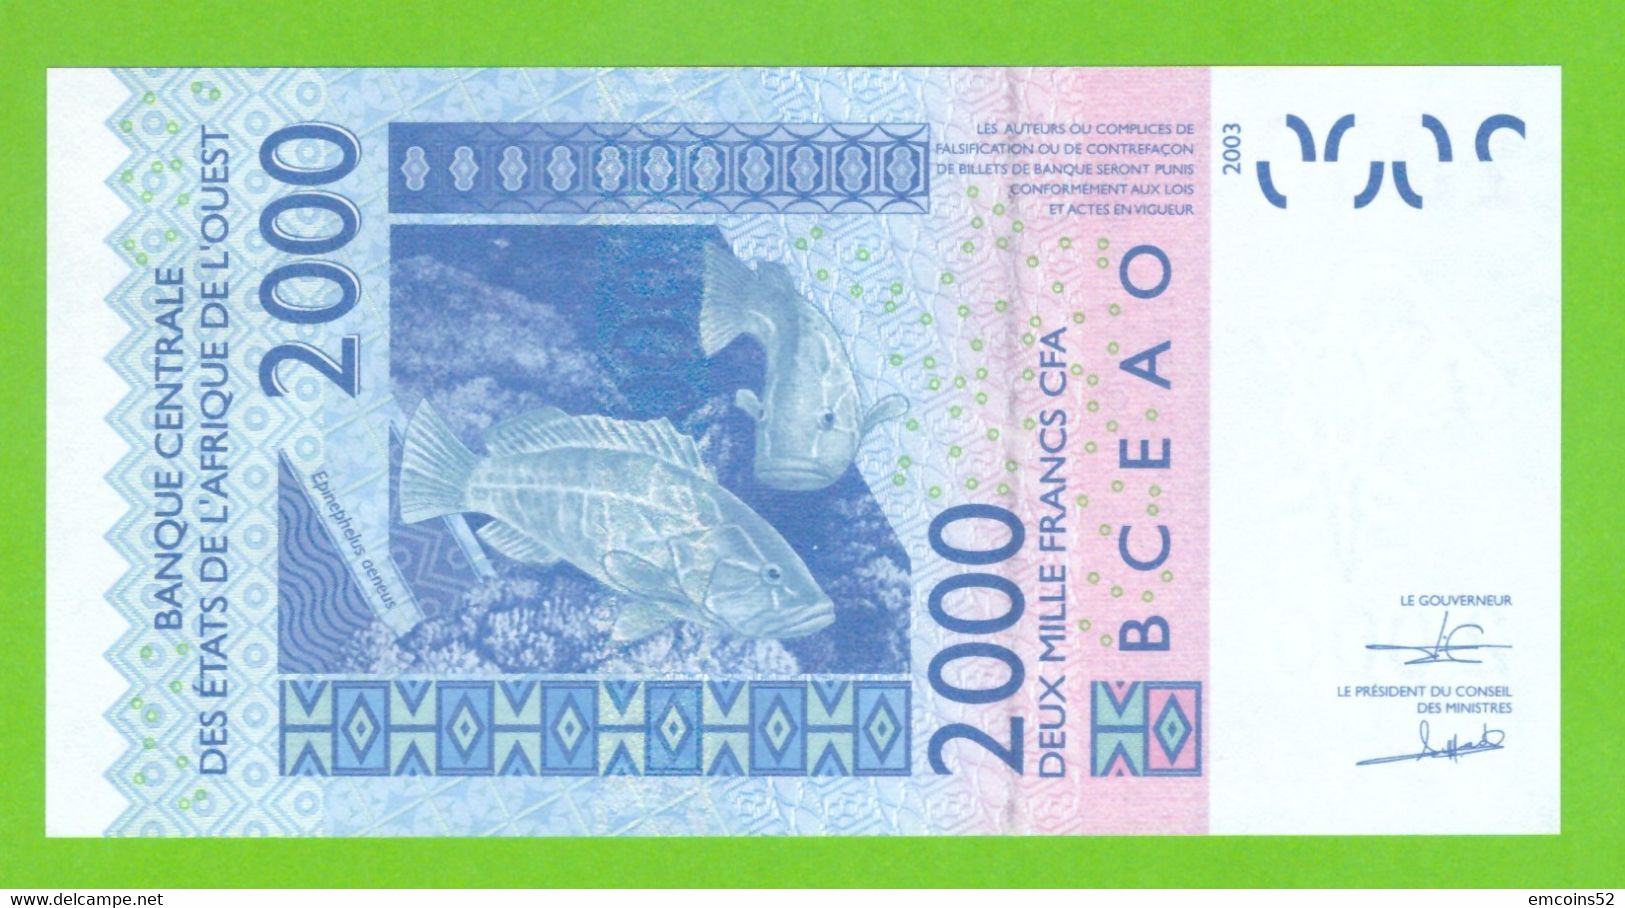 IVORY COAST W.A.S. 2000 FRANCS 2018  P-116Ar  UNC - Stati Dell'Africa Occidentale